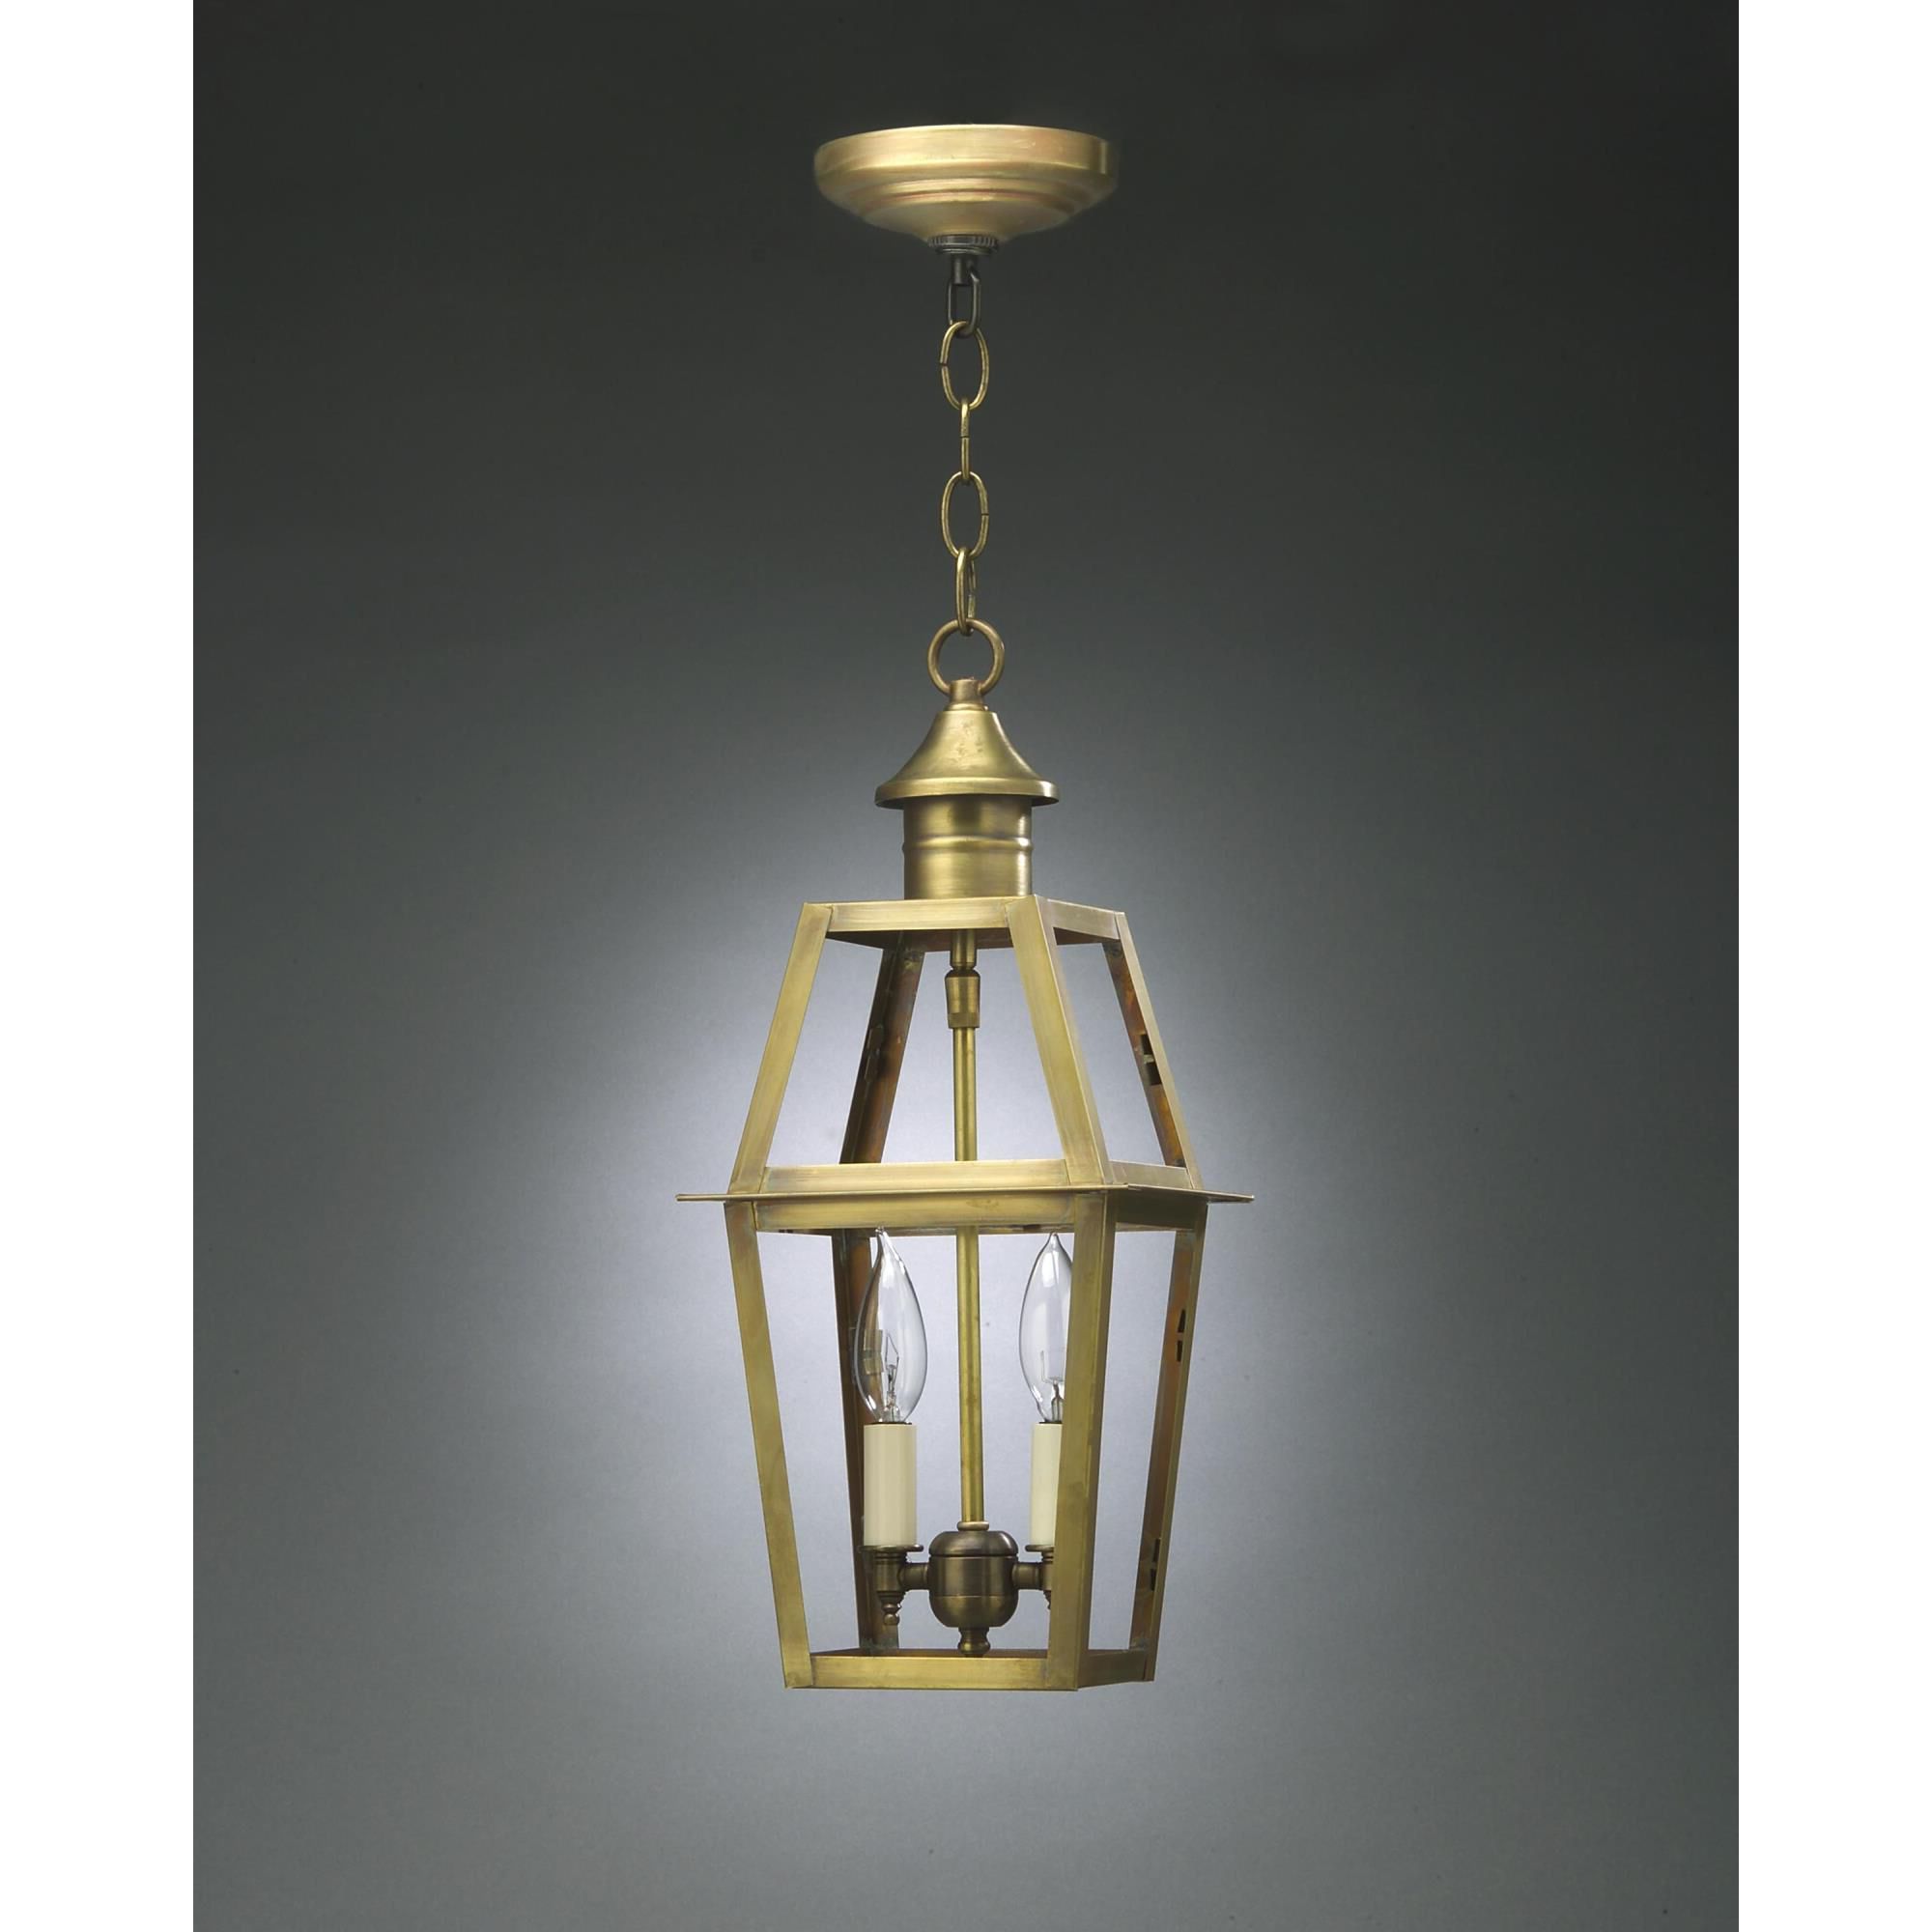 Hanging Lights, Outdoor Hanging Lights, Hanging Lanterns In Most Up To Date 18 Inch Lantern Chandeliers (View 8 of 10)